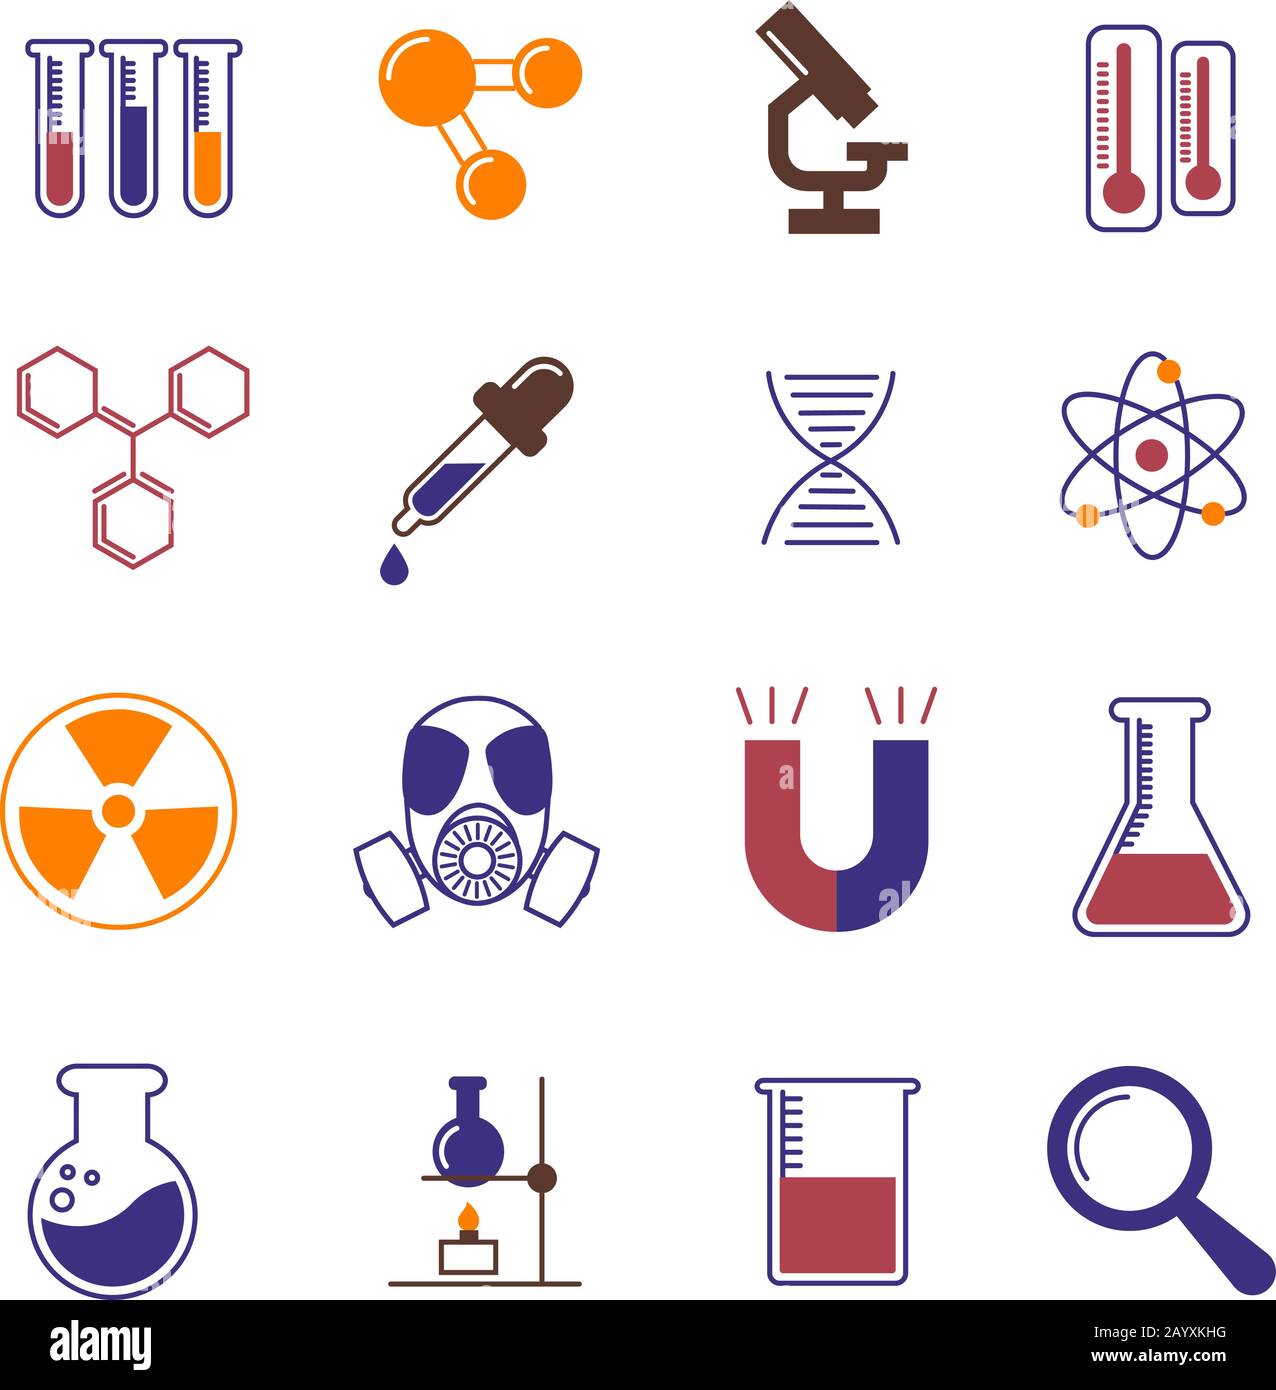 Color chemistry, research and science vector icons. Chemistry laboratory instruments and scientific experiments symbols Stock Vector